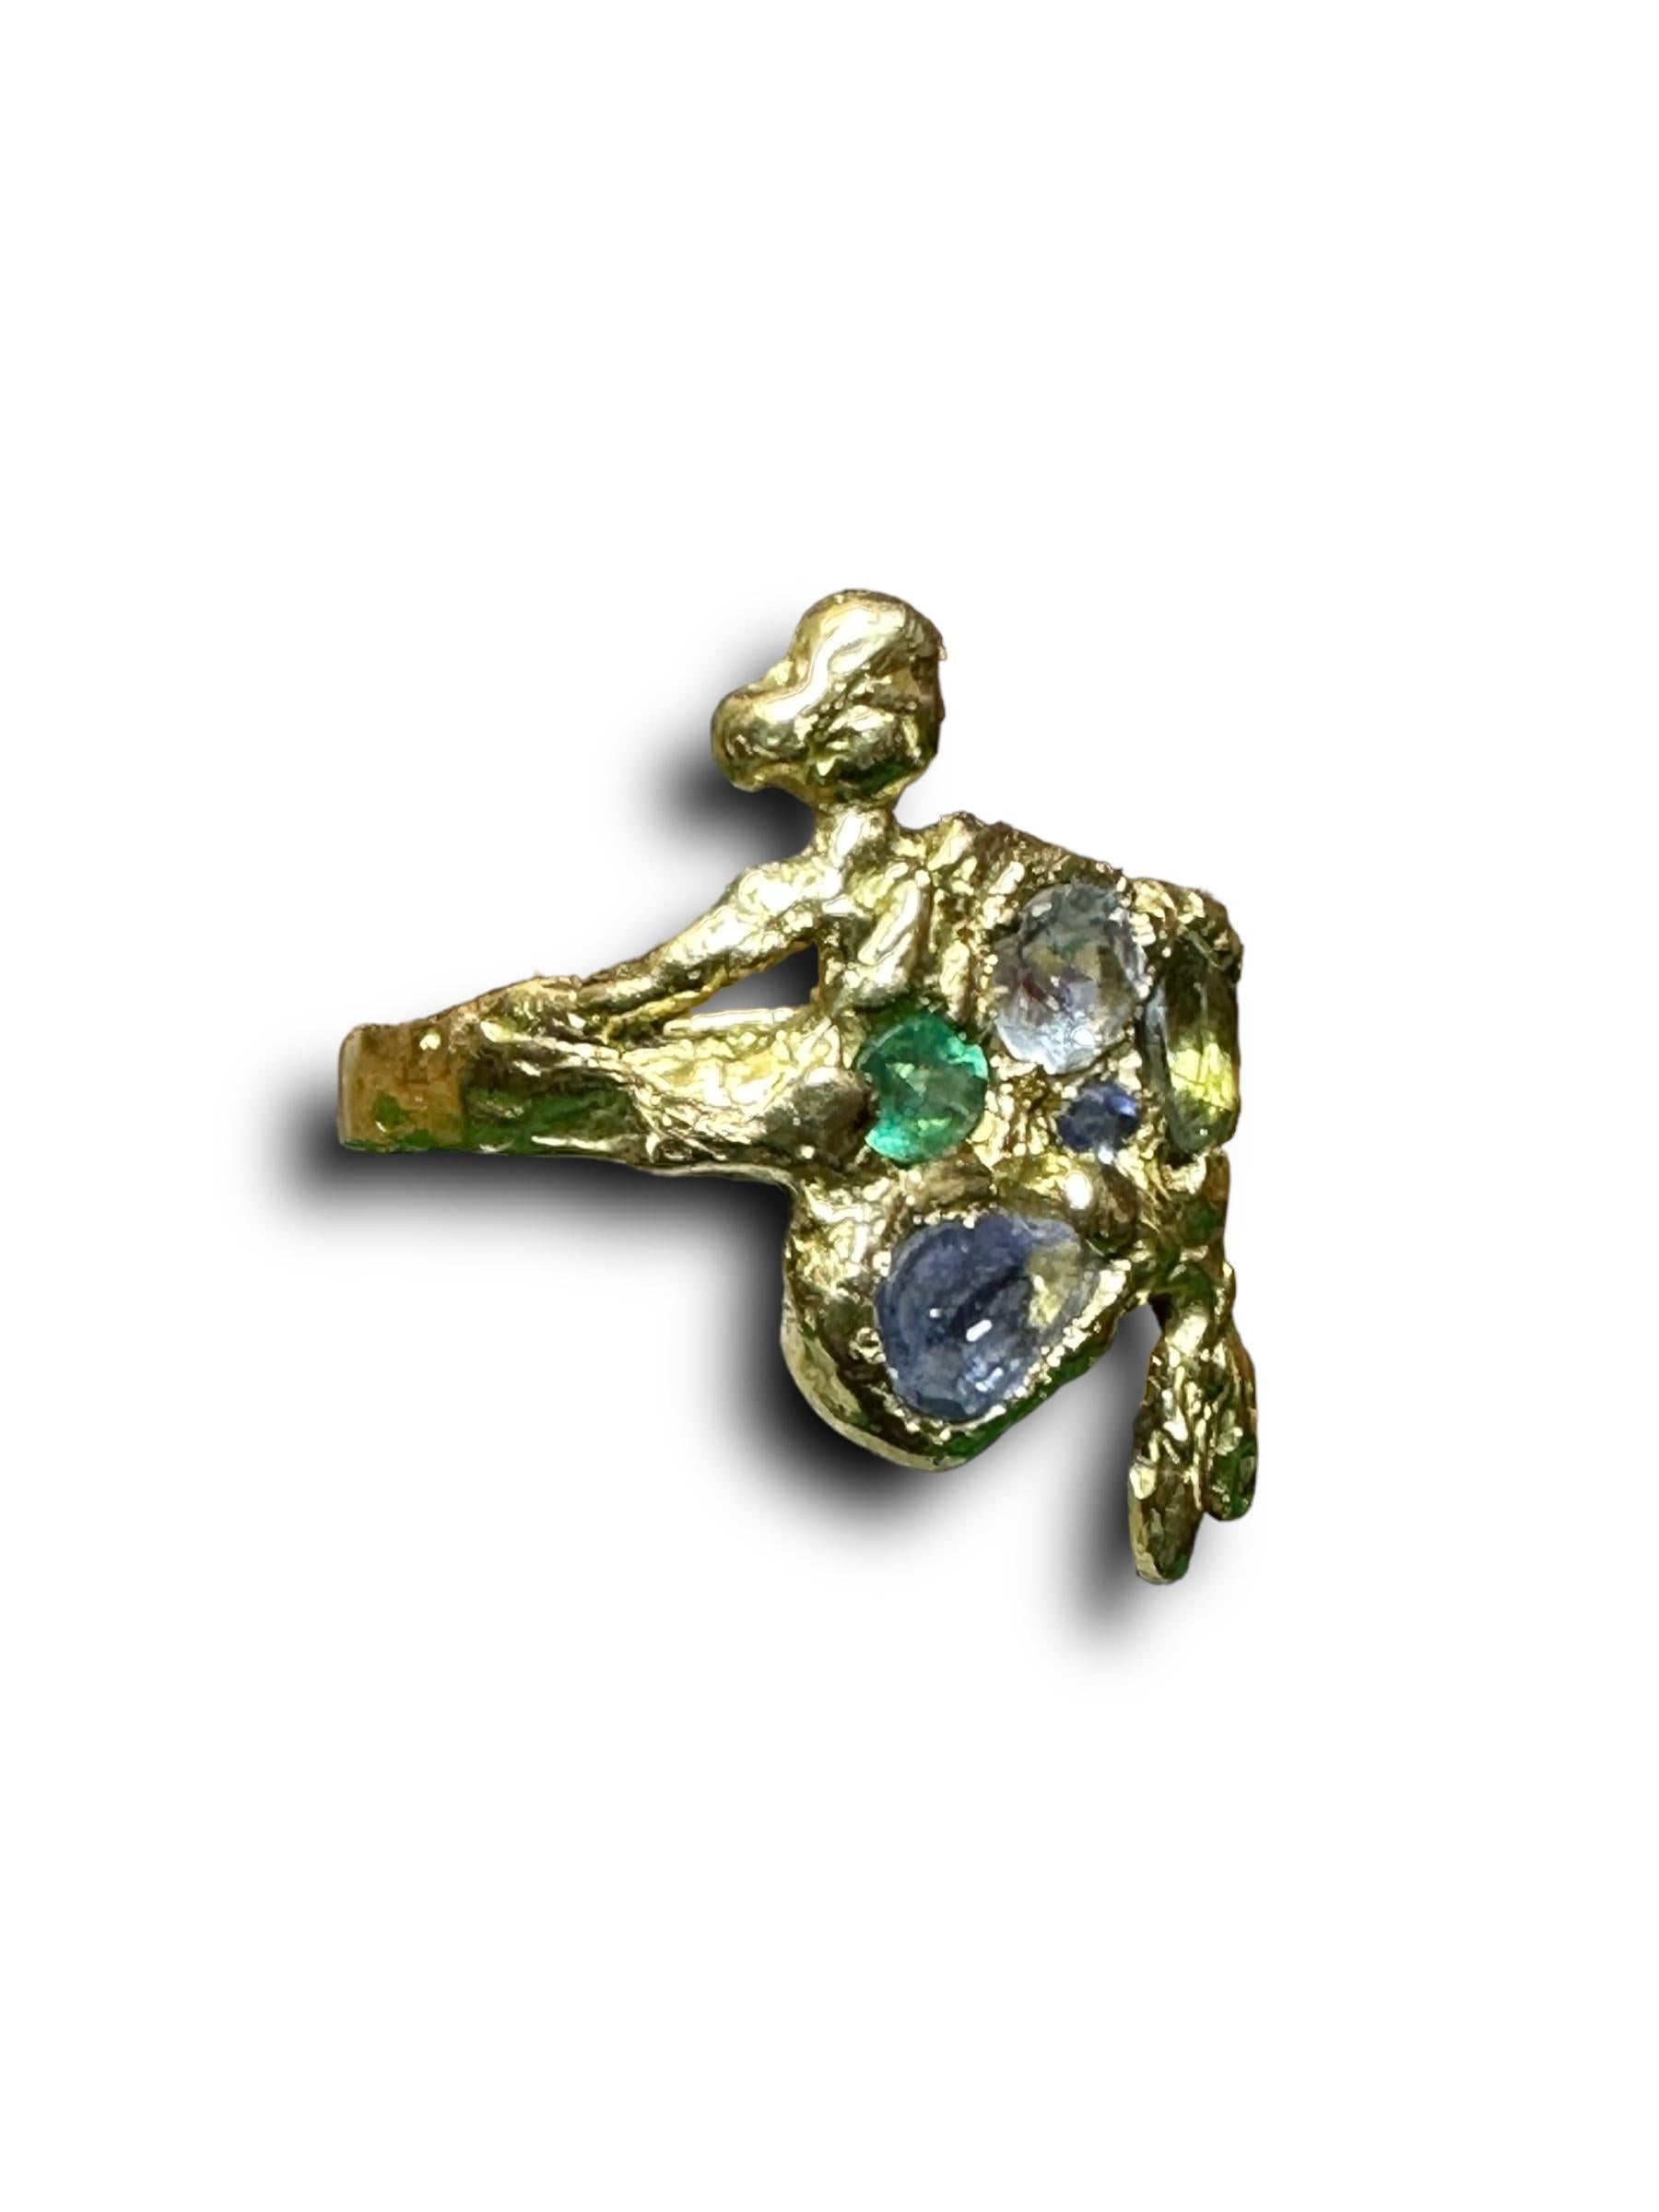 Artisan Siren Mermaid Ring with Emeralds, Sapphires, Aquamarine in Gold, in stock For Sale